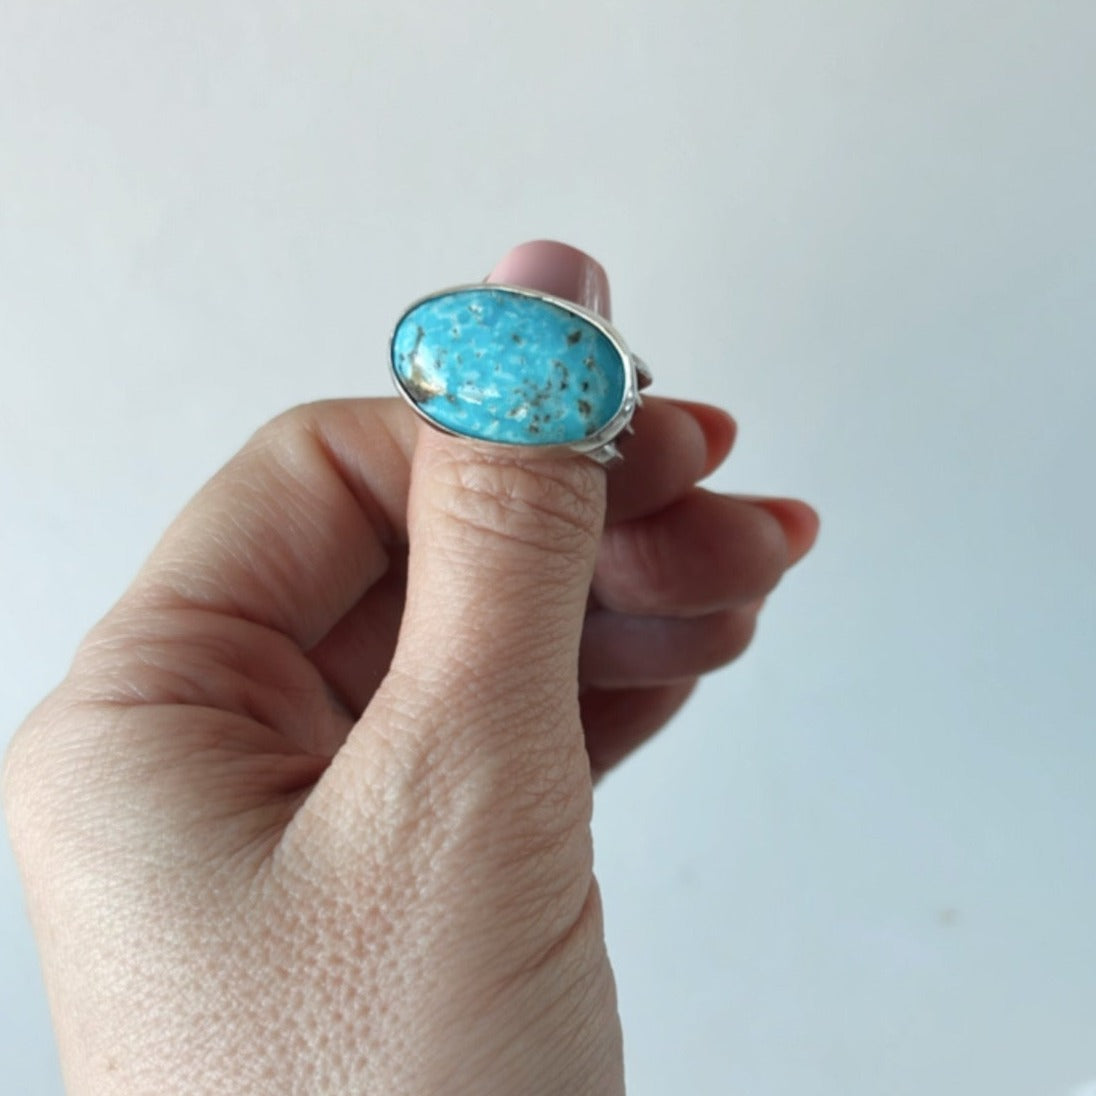 East West Turquoise Wide Band Ring - Size 6.75 - Desert Sky